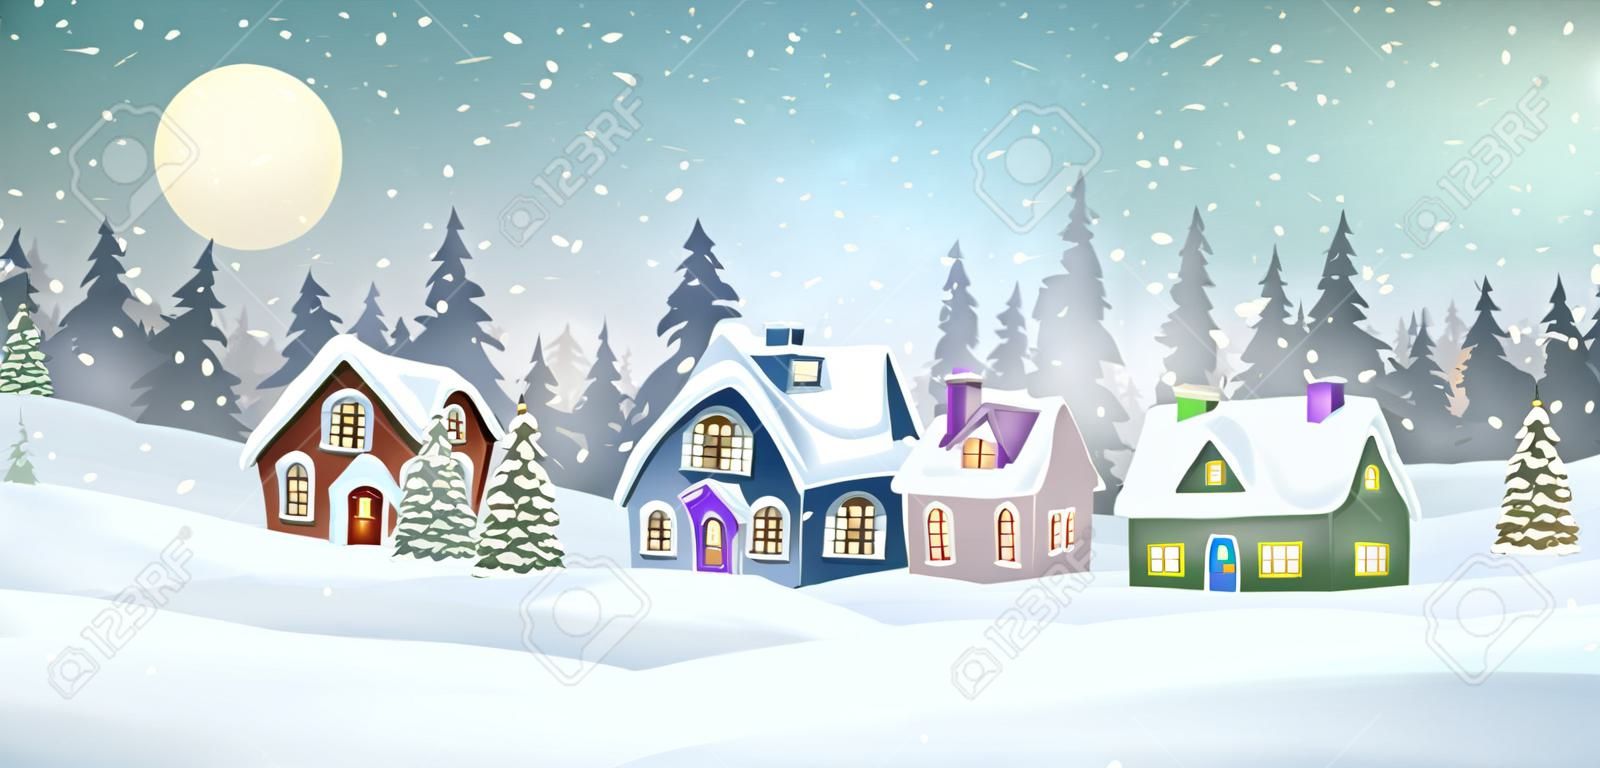 Winter village landscape with snow covered houses in pine forest. Christmas holidays vector illustration